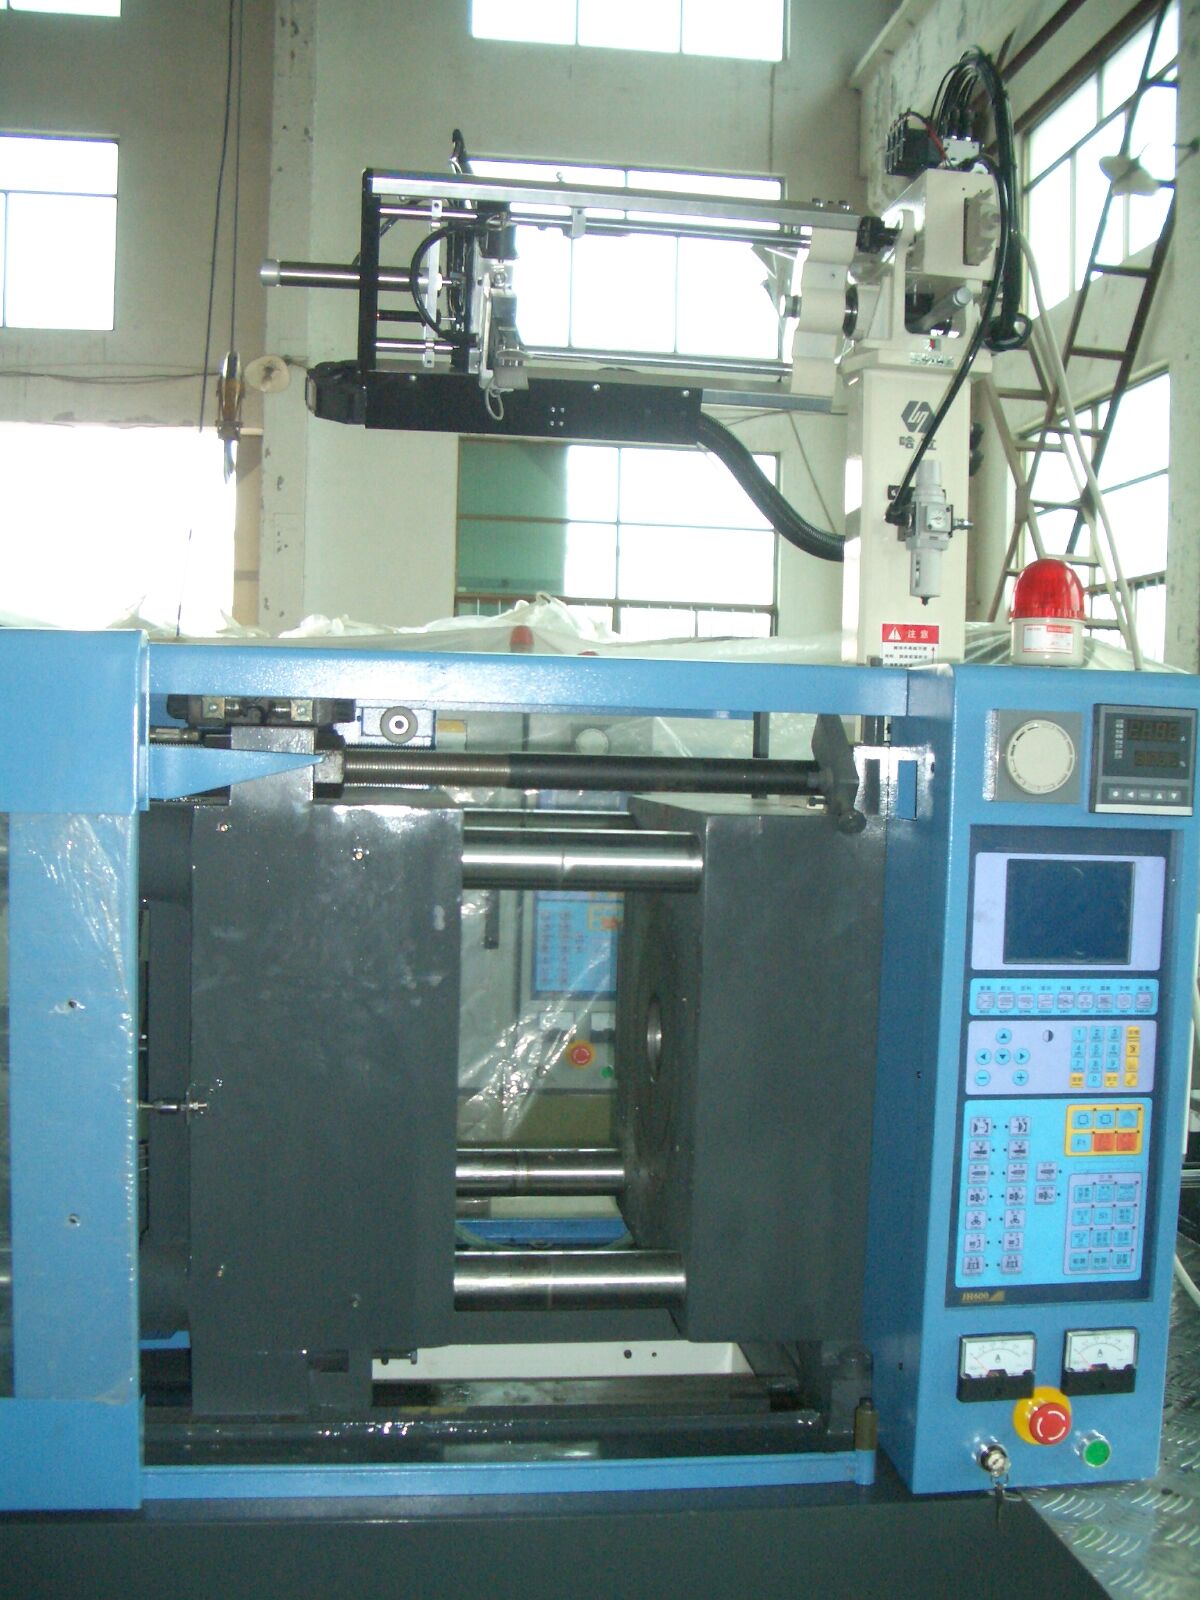 Magnetic Field Injection Molding Machine